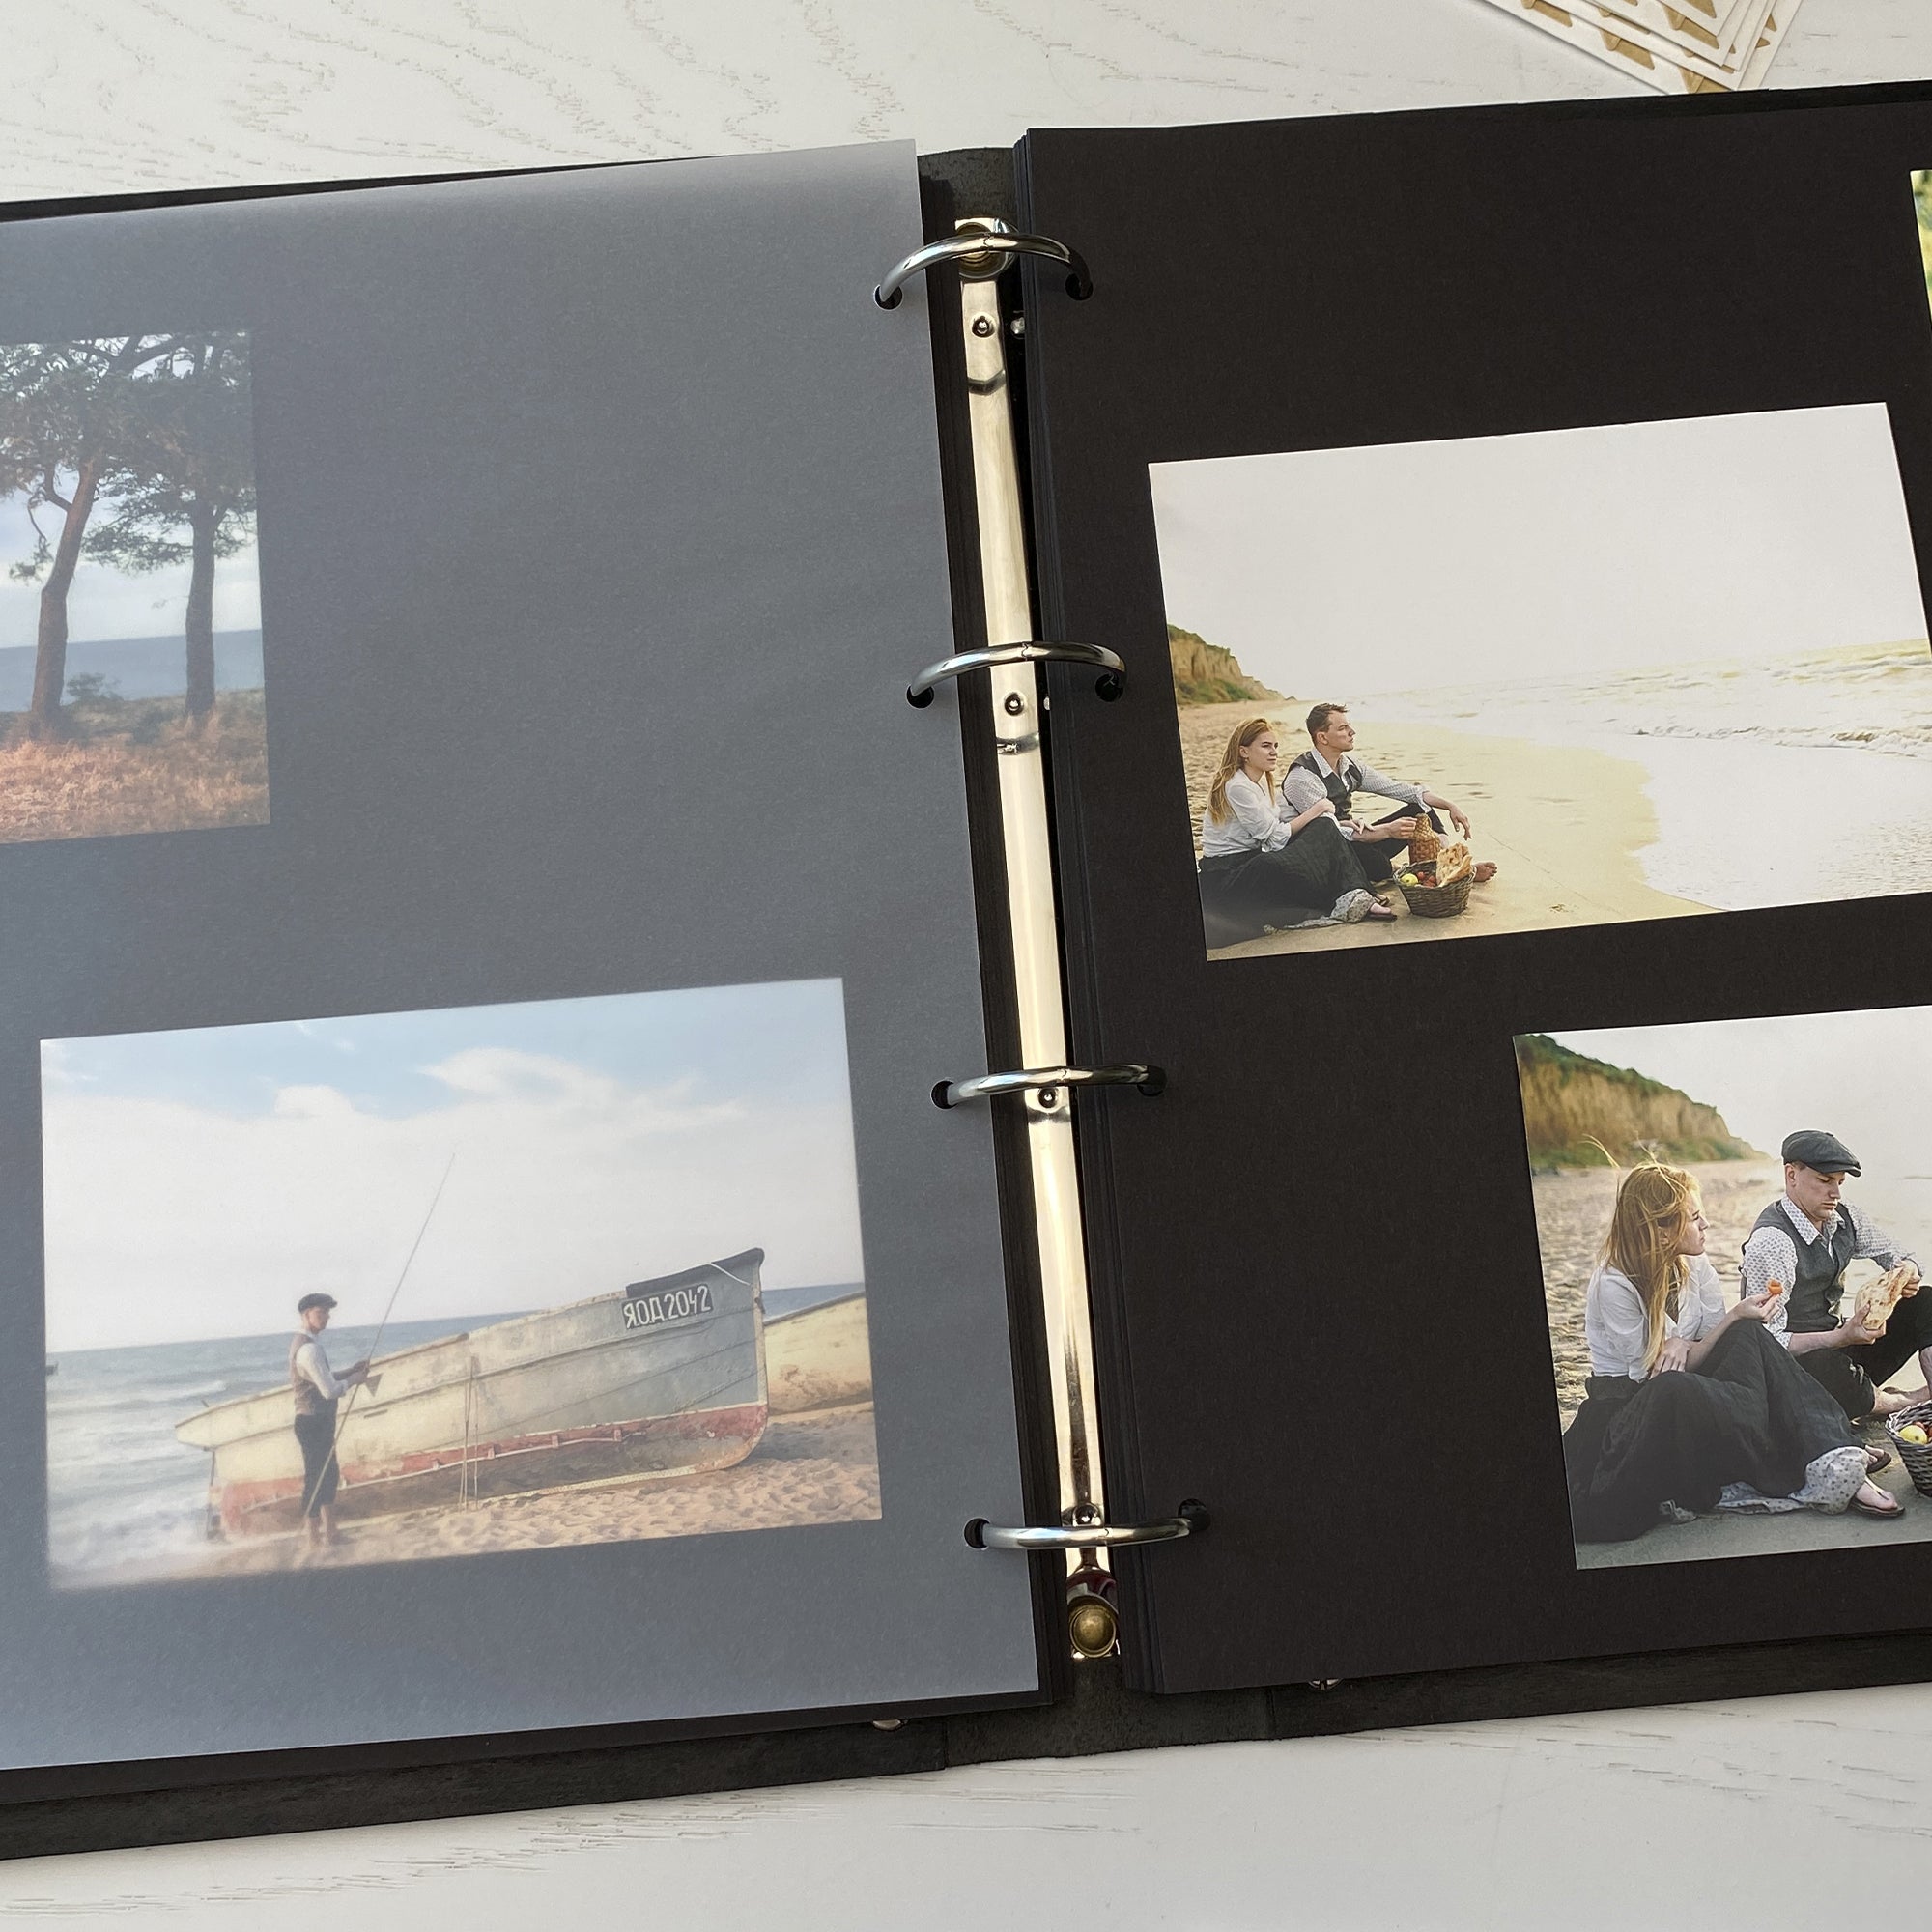 Personalized photo album with leather cover and Mountains engraving